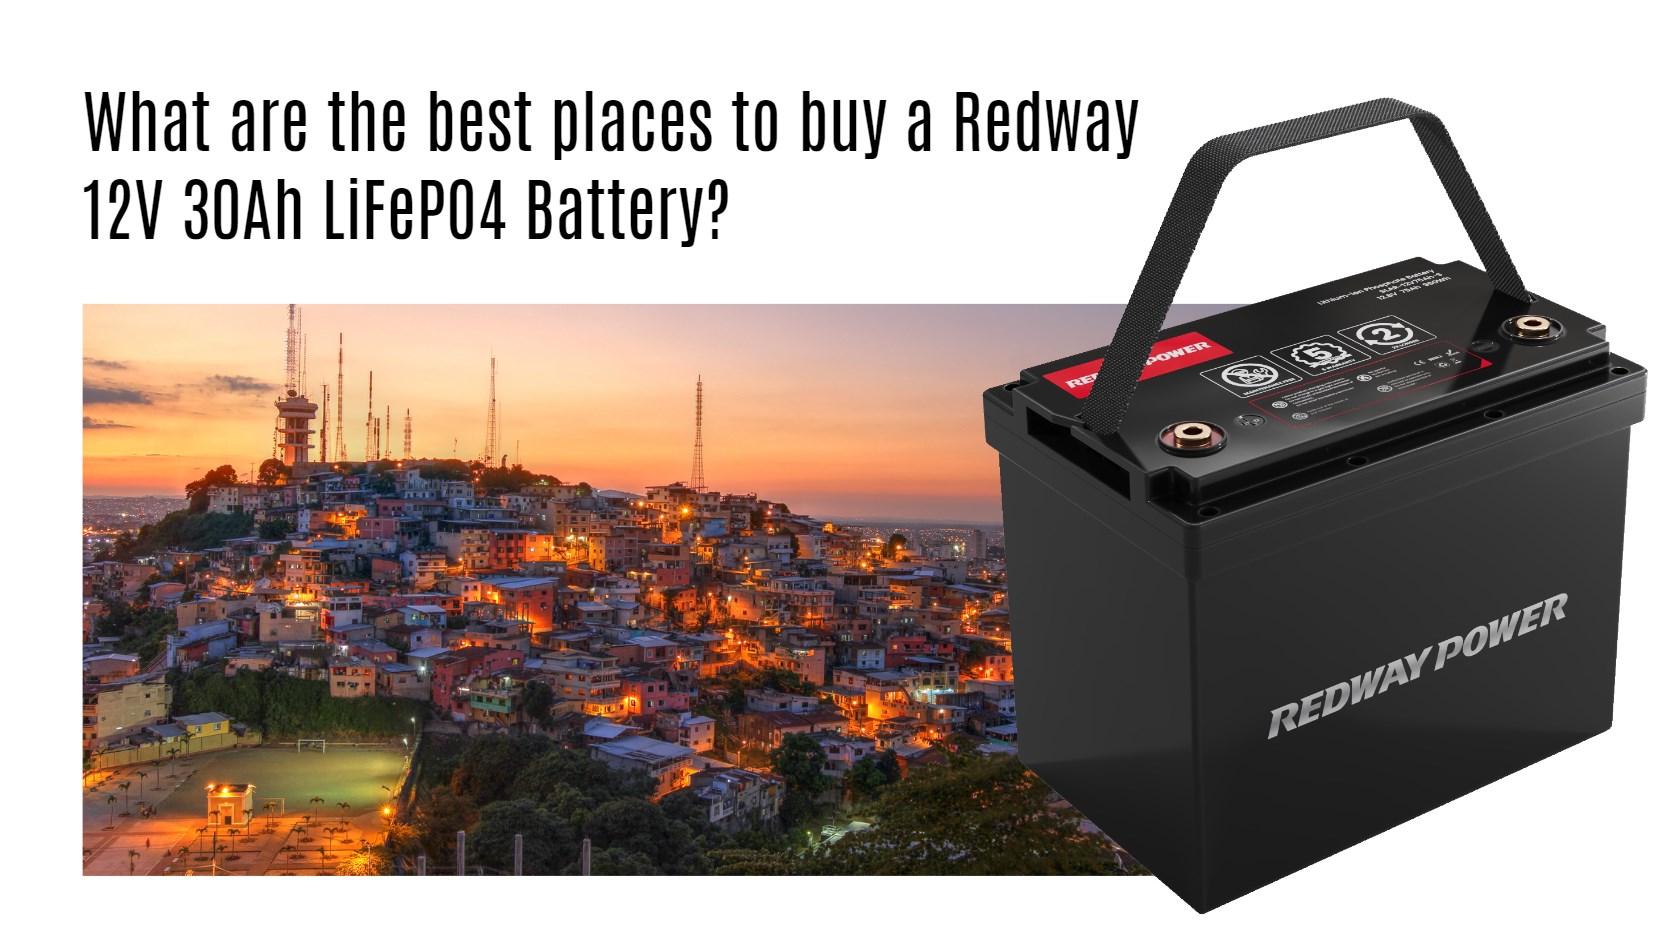 What are the best places to buy a Redway 12V 30Ah LiFePO4 Battery?